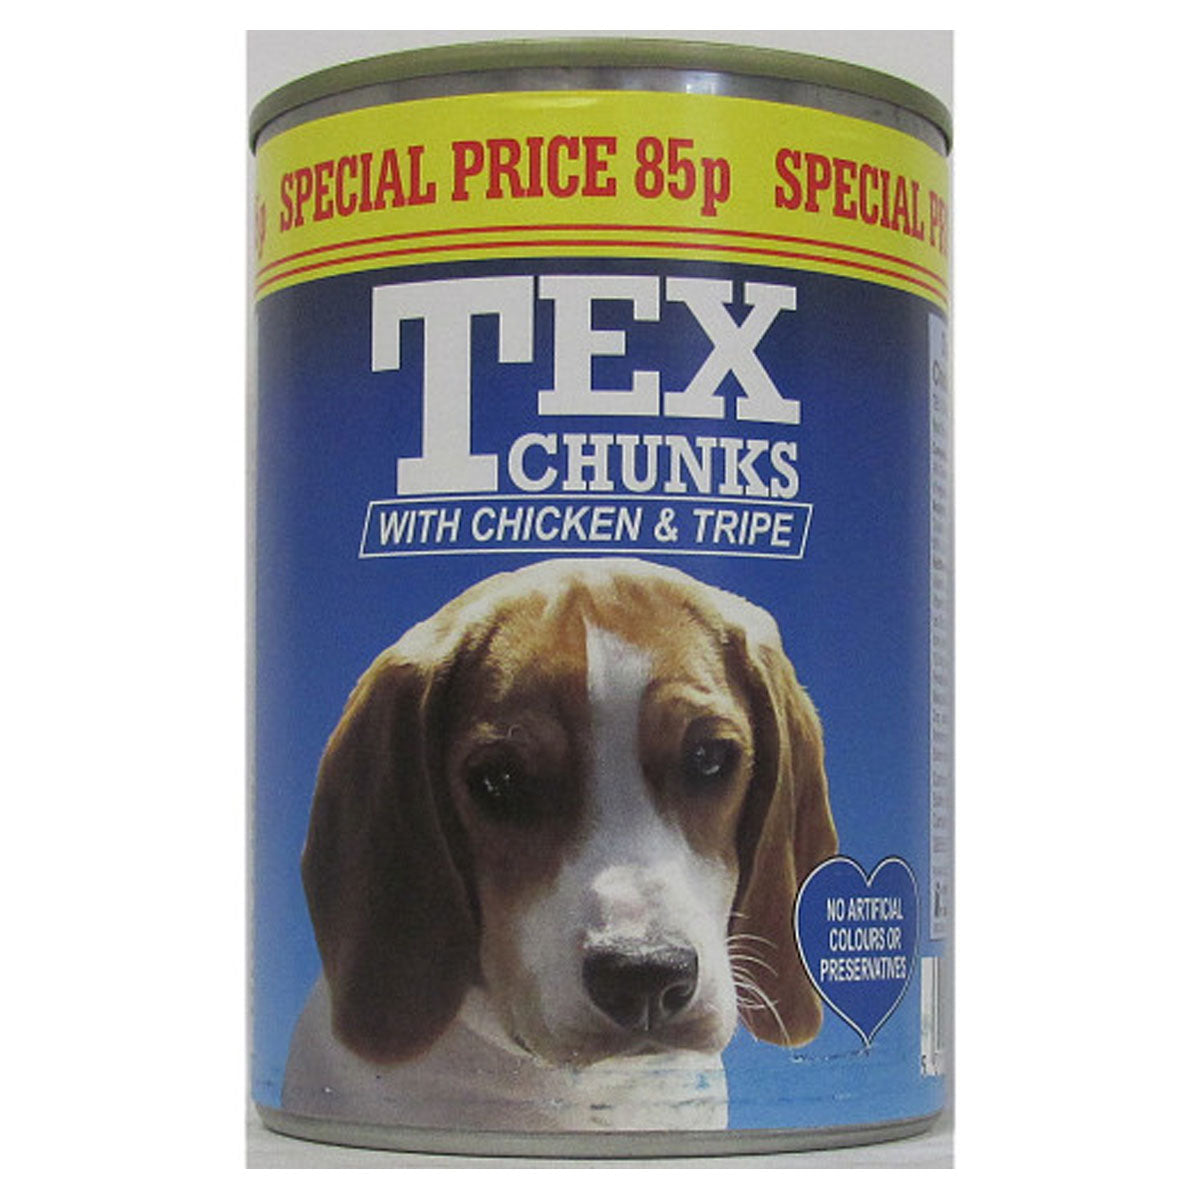 A can of Tex - Chicken & Tripe - 400g with chicken and tape.